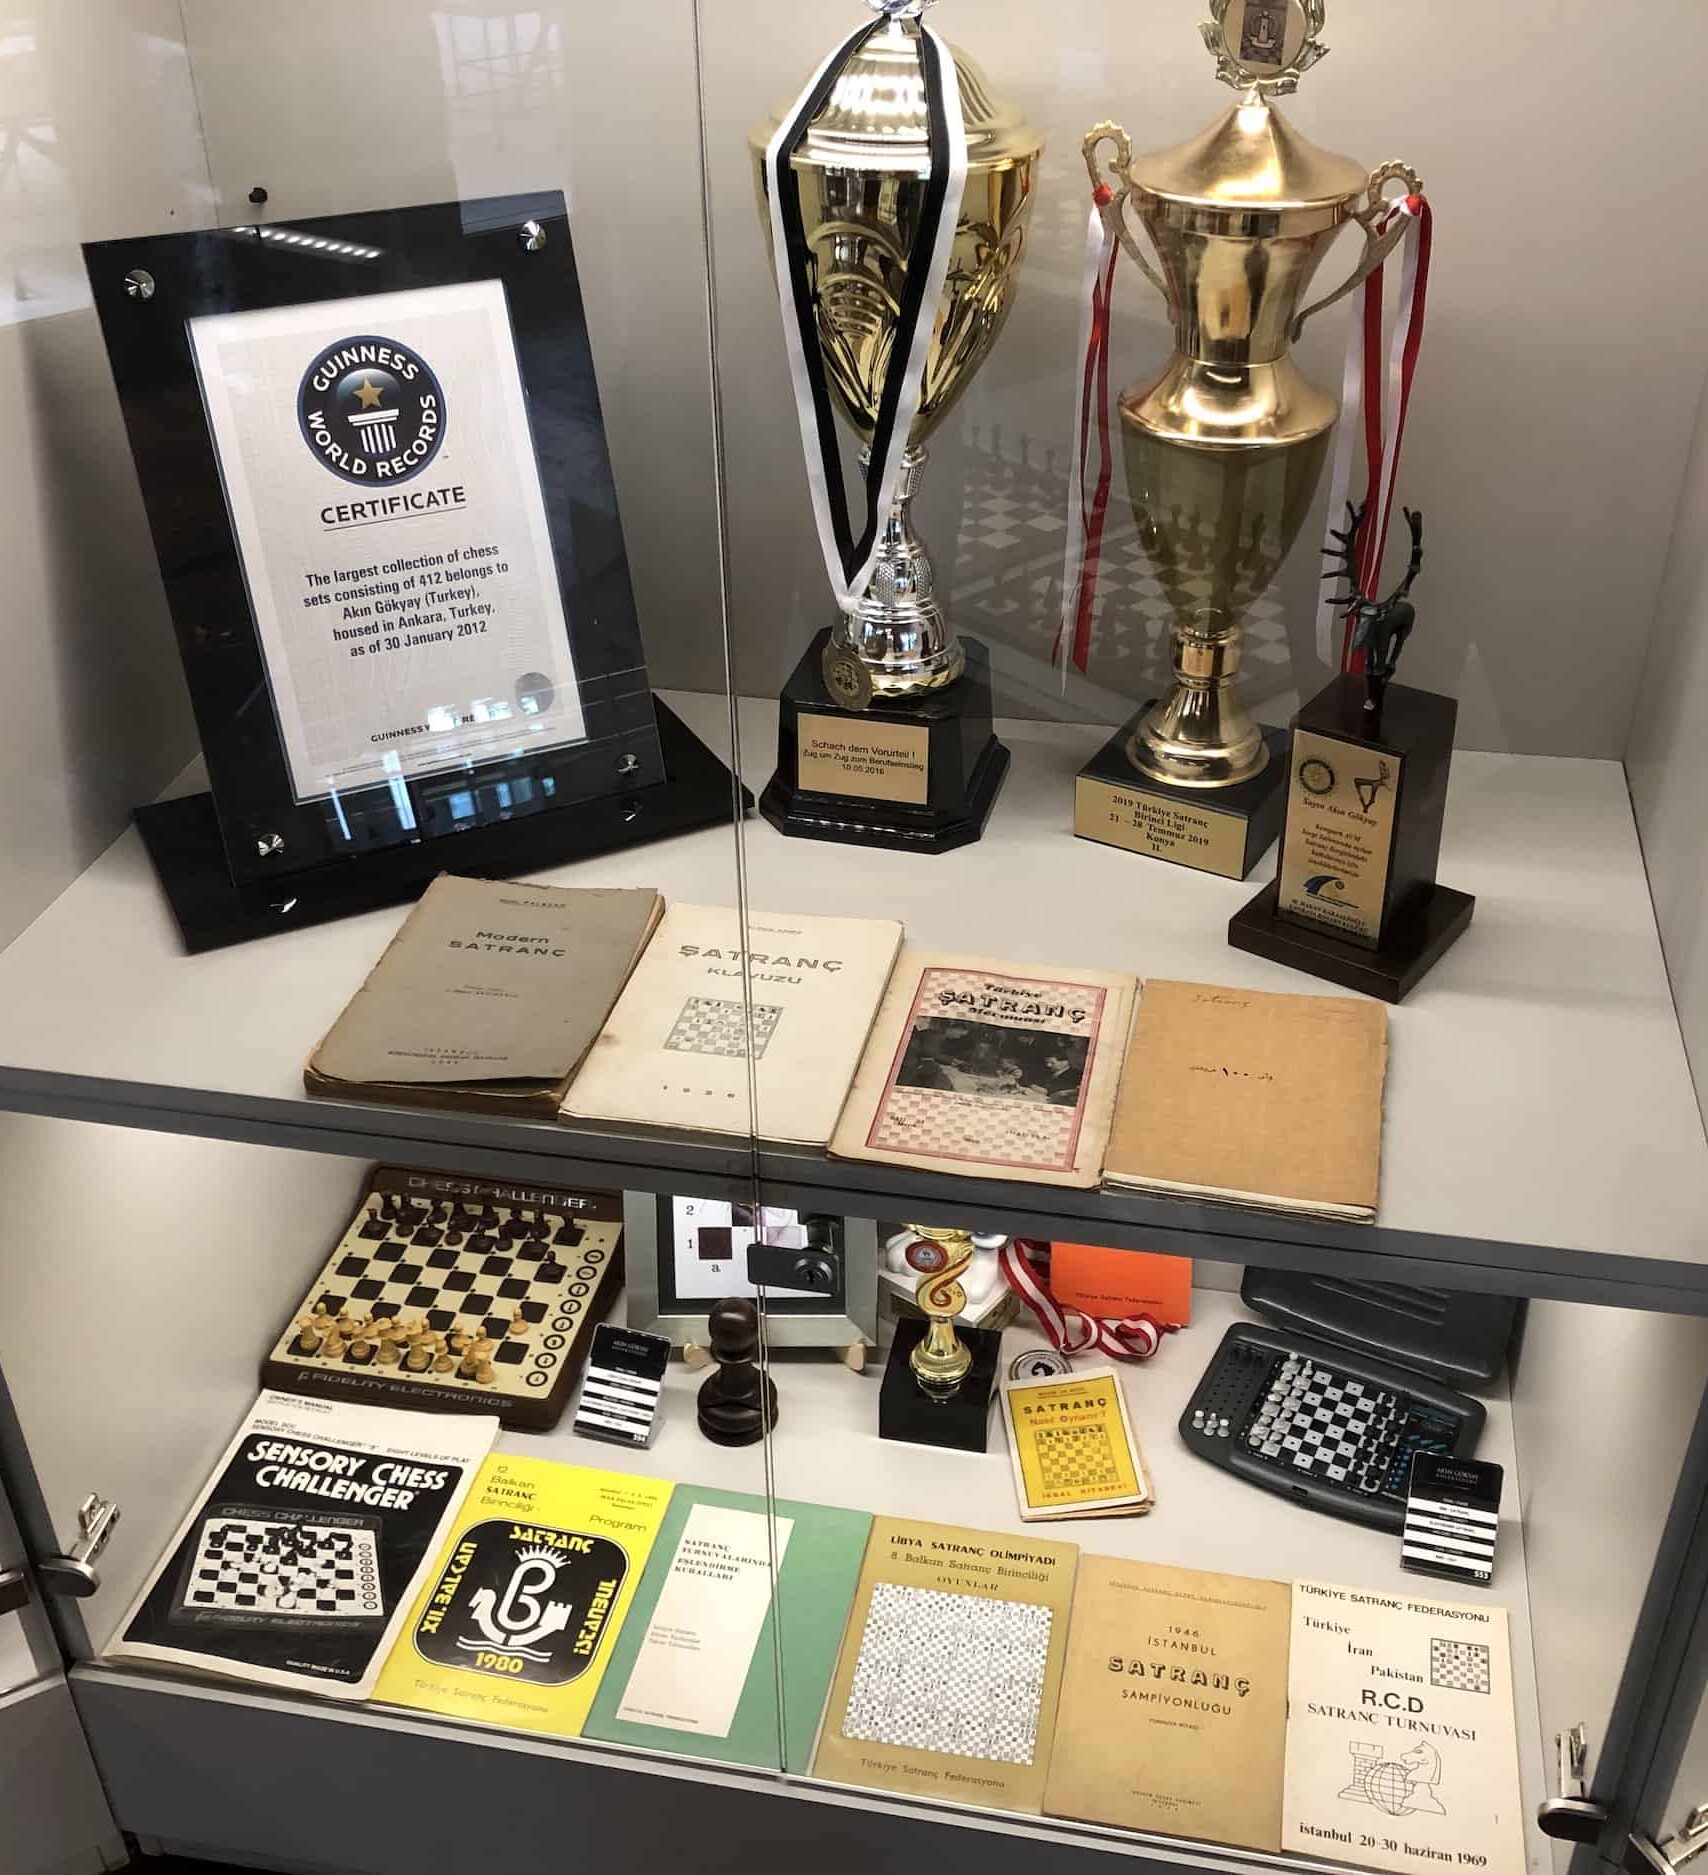 Guinness World Records certificate, trophies, and books